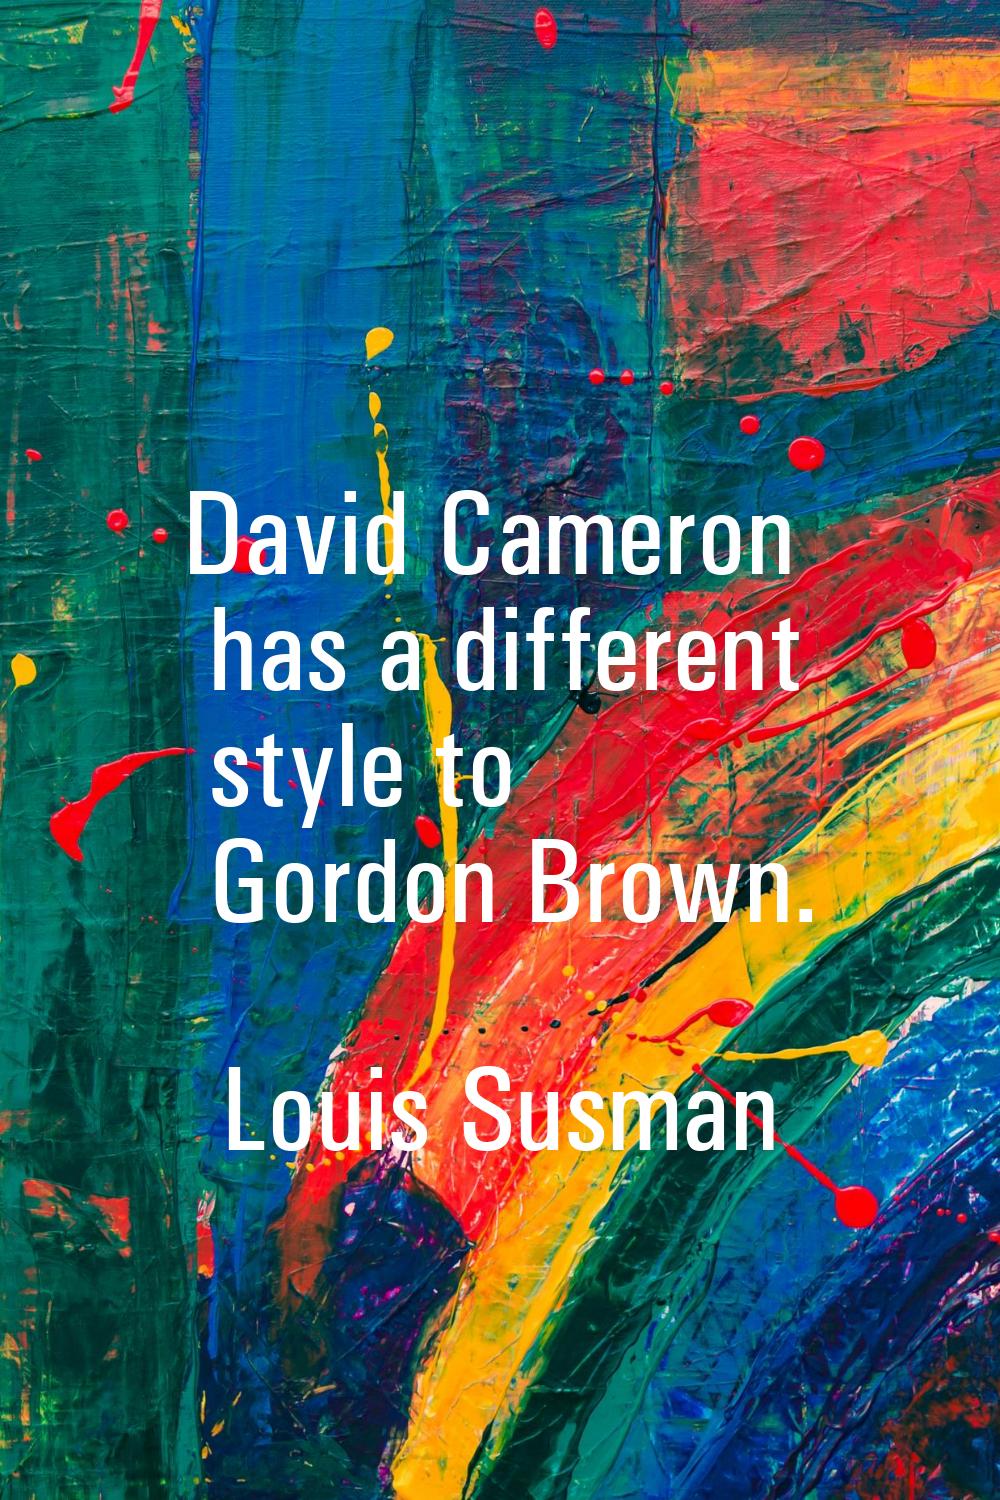 David Cameron has a different style to Gordon Brown.